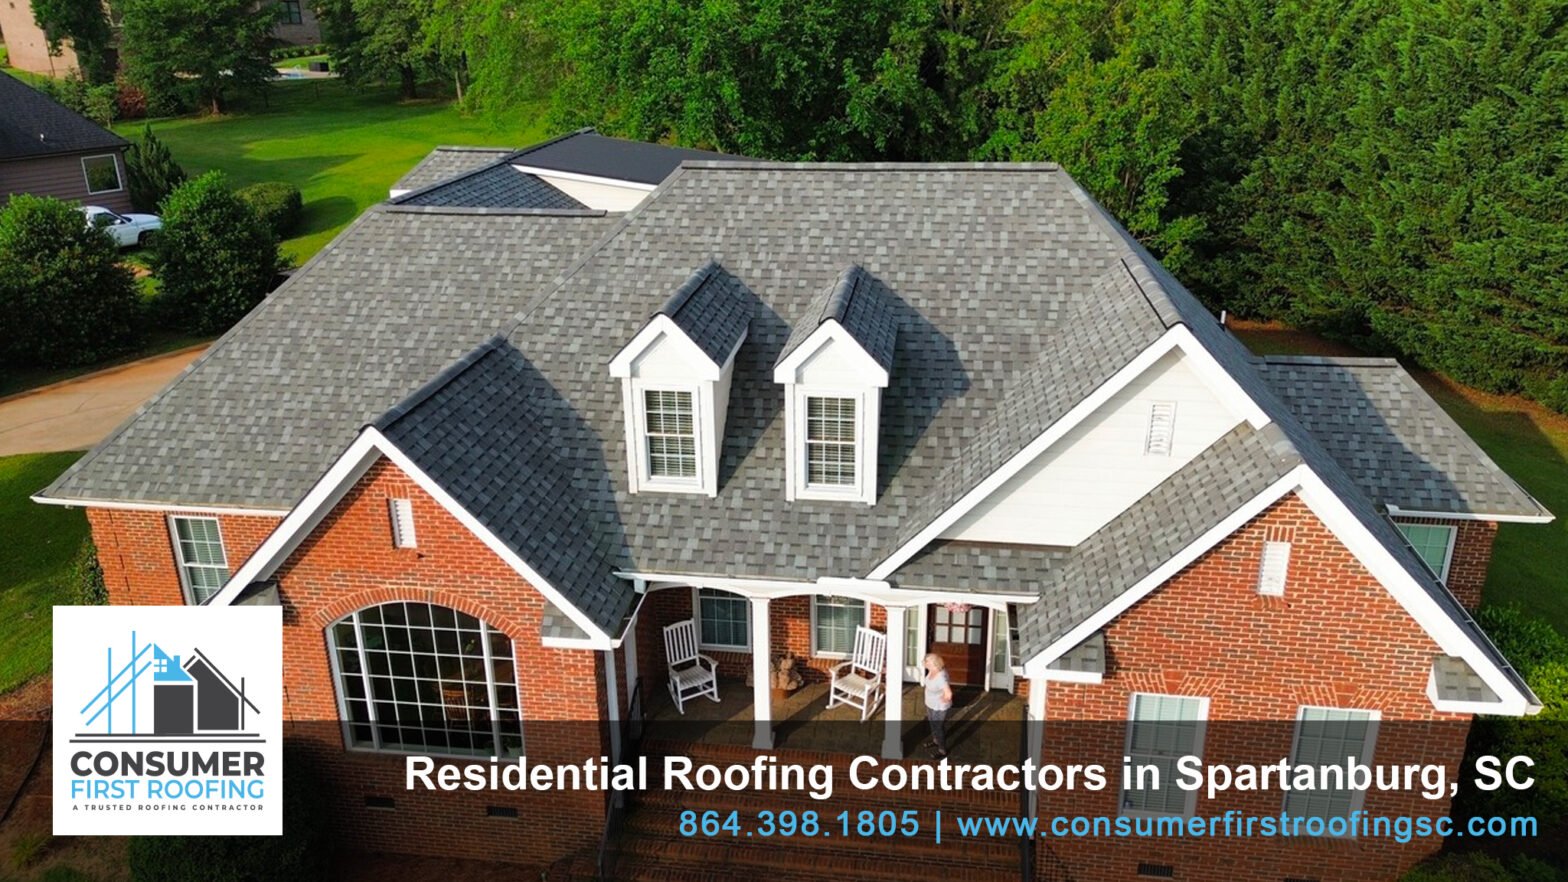 Residential Roofing Contractors in Spartanburg, SC